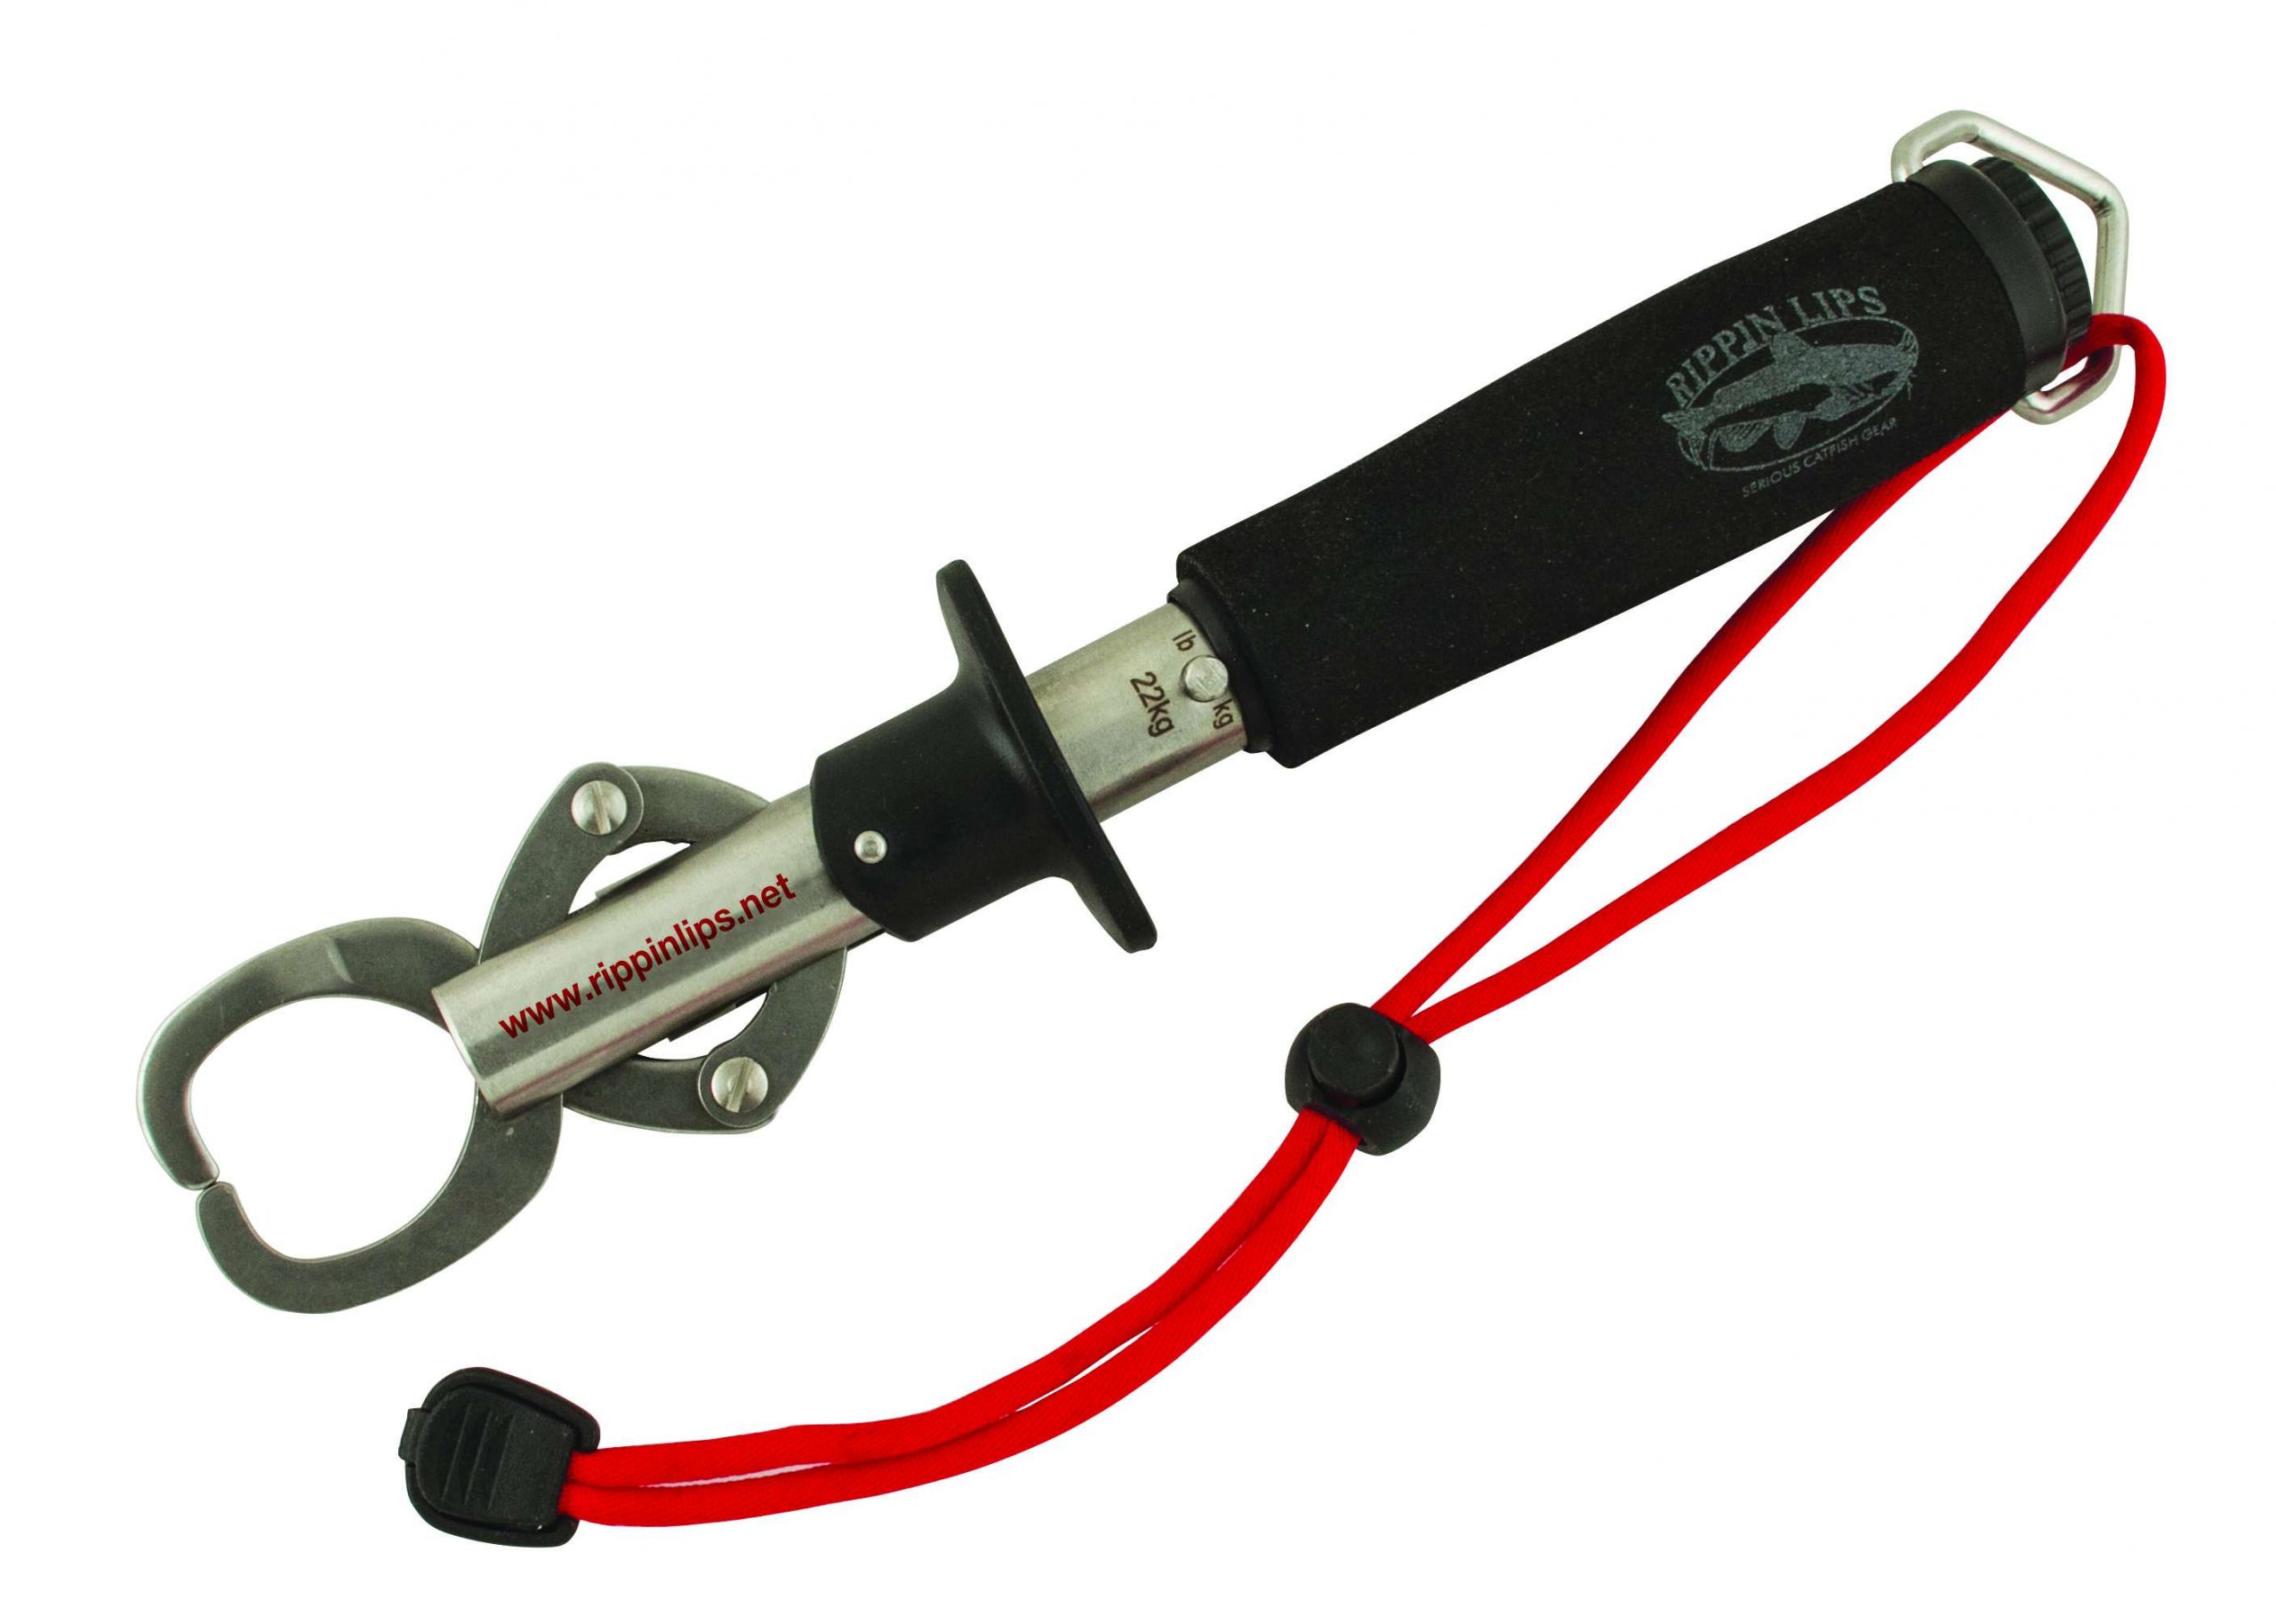 <b>Rippin Lips </b><br>	PRO Big Fish Gripper<br>	Sometimes you find a monster on your line â intentionally or not. This fish gripper is constructed of non-corrosive stainless steel, affording years of flawless operation. Giving grip to the gripper â the angler â the solid-state tool features a non-slip rubberized handle with adjustable wrist strap. A built-in scale will weigh up to 50 pounds, too. Anything bigger and youâre probably going to round up for storytelling purposes anyway.